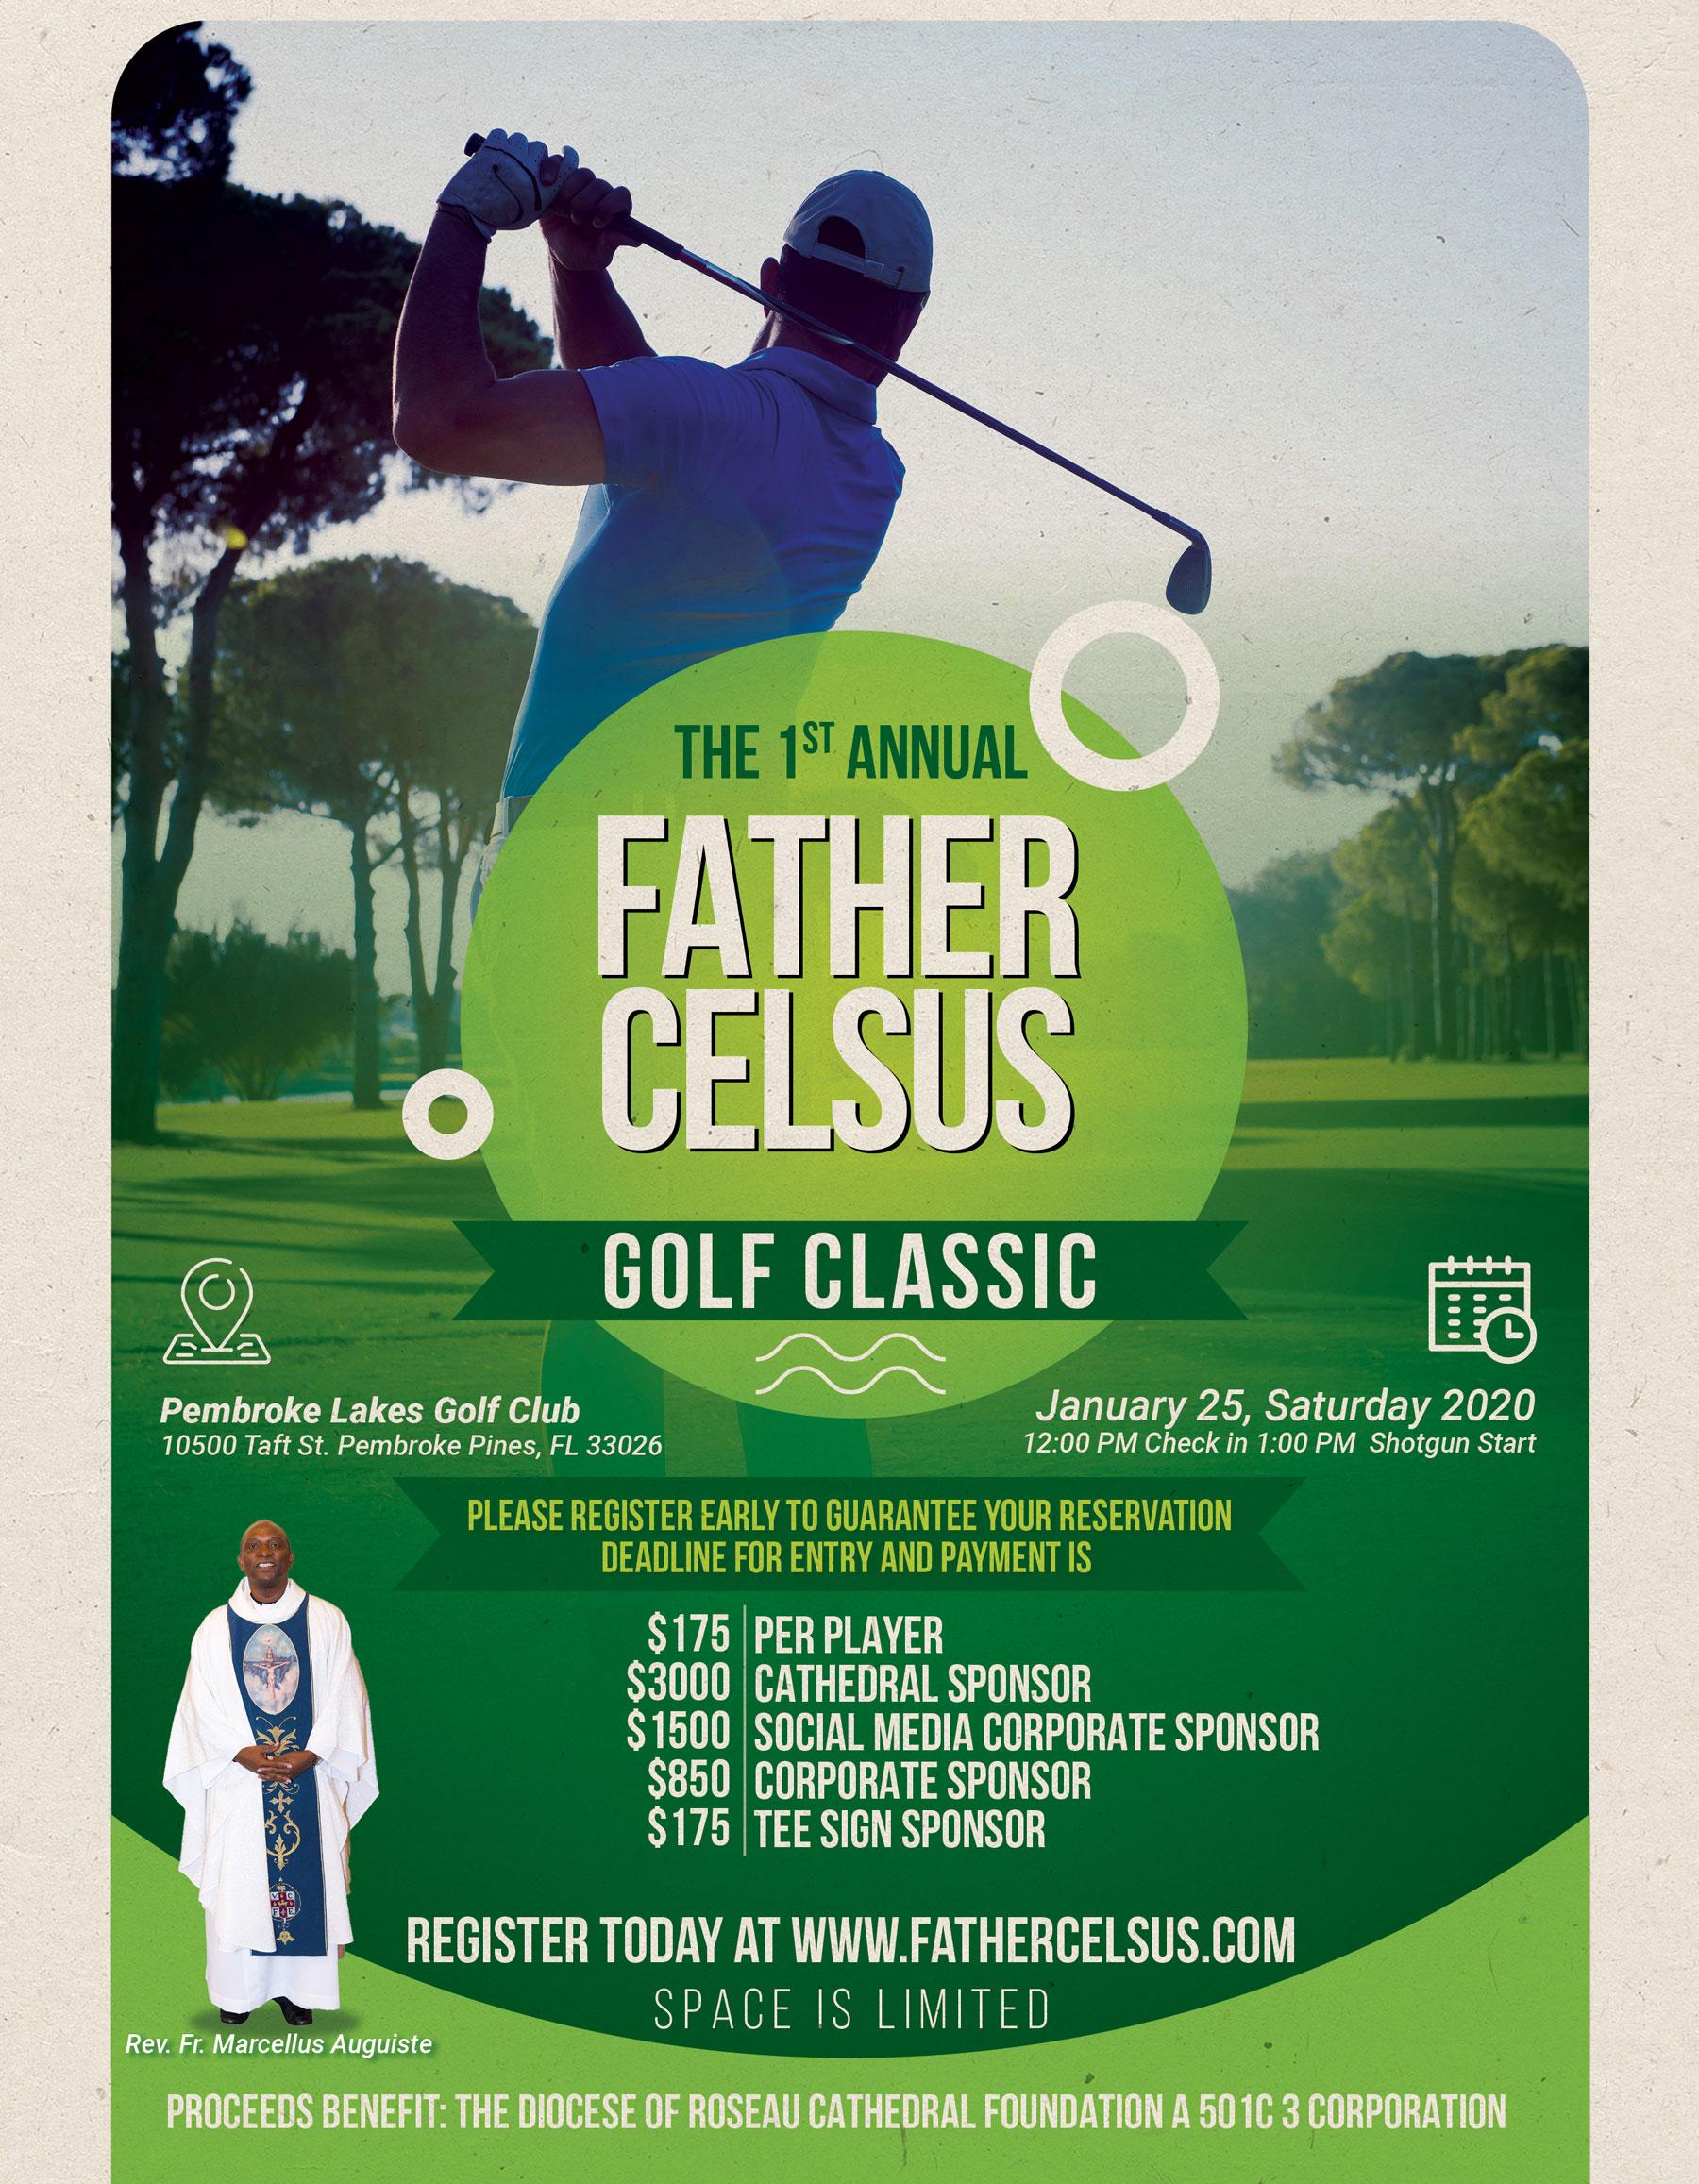 The 1st Annual FATHER CELSUS Golf Classic